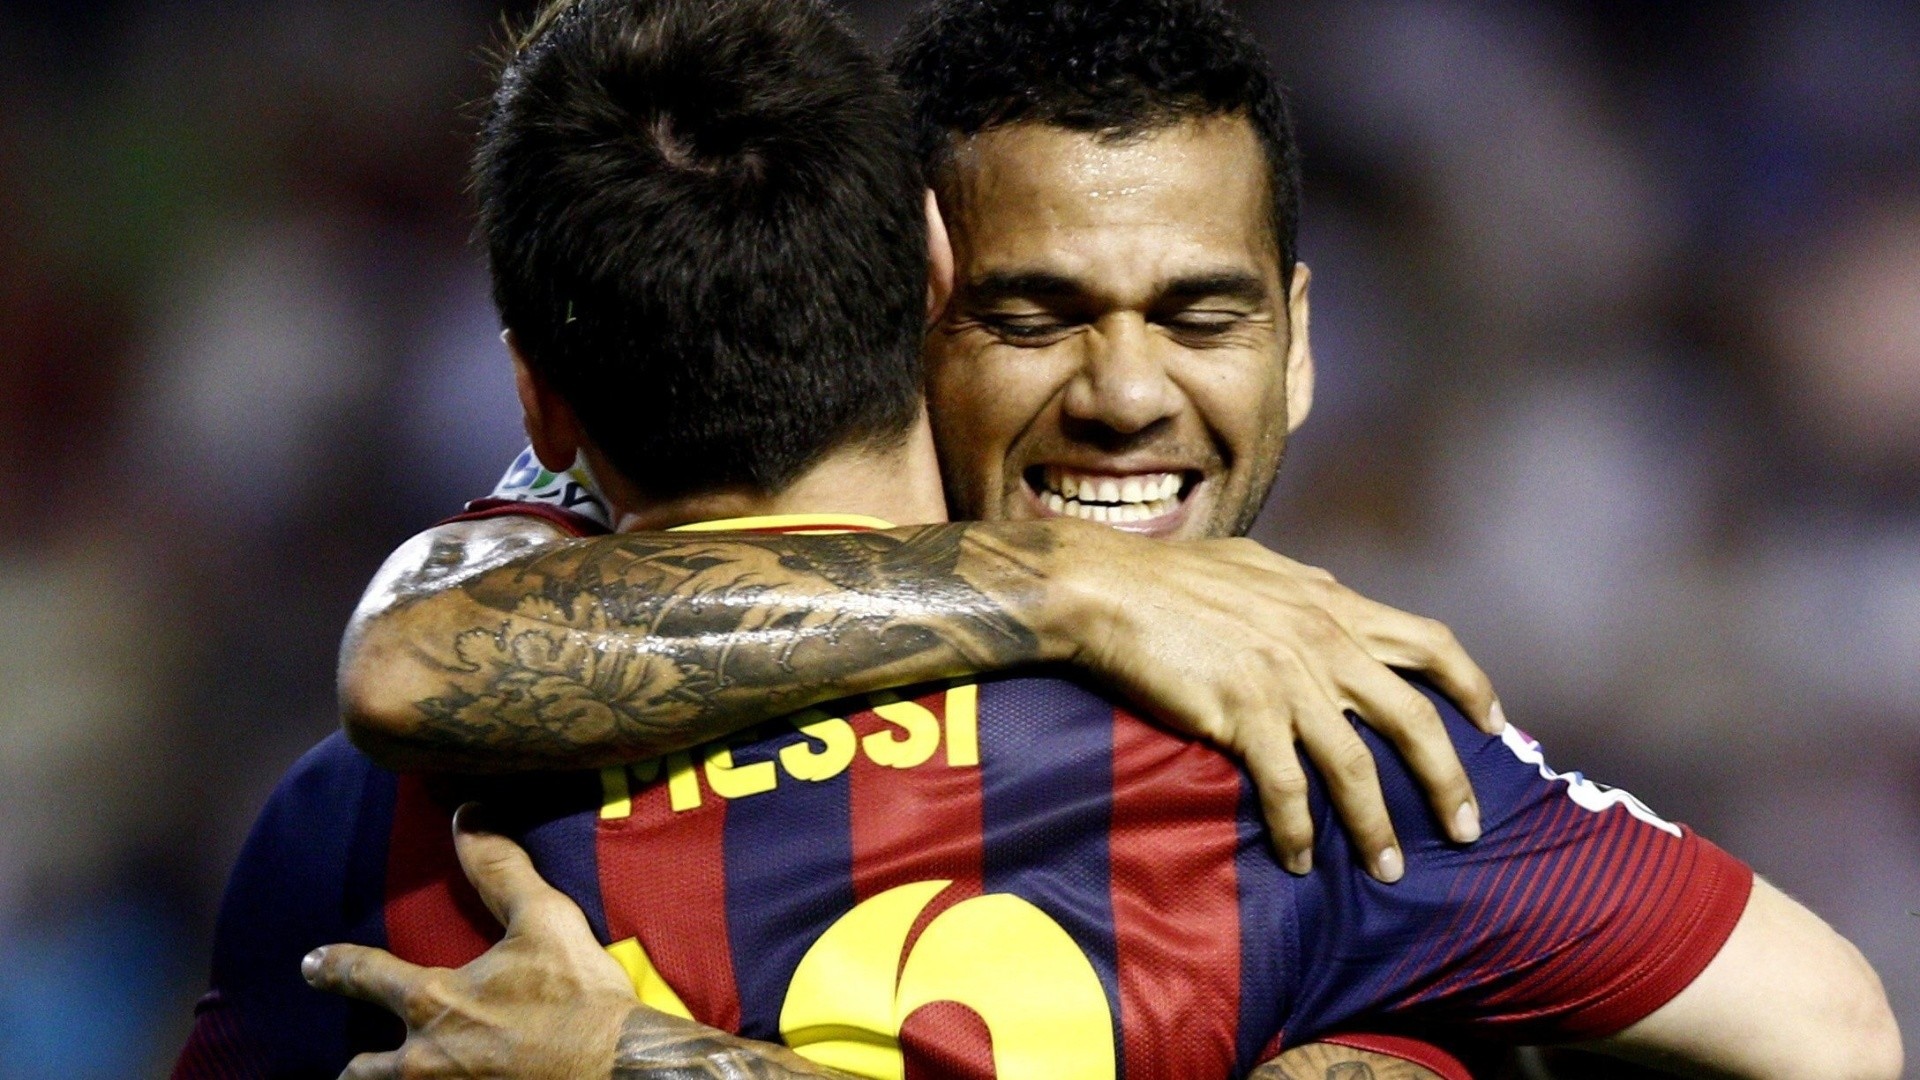 1920x1080 ... Dani Alves Tattoo 2012 | Wallpapers, Photos, Images and Profile ...